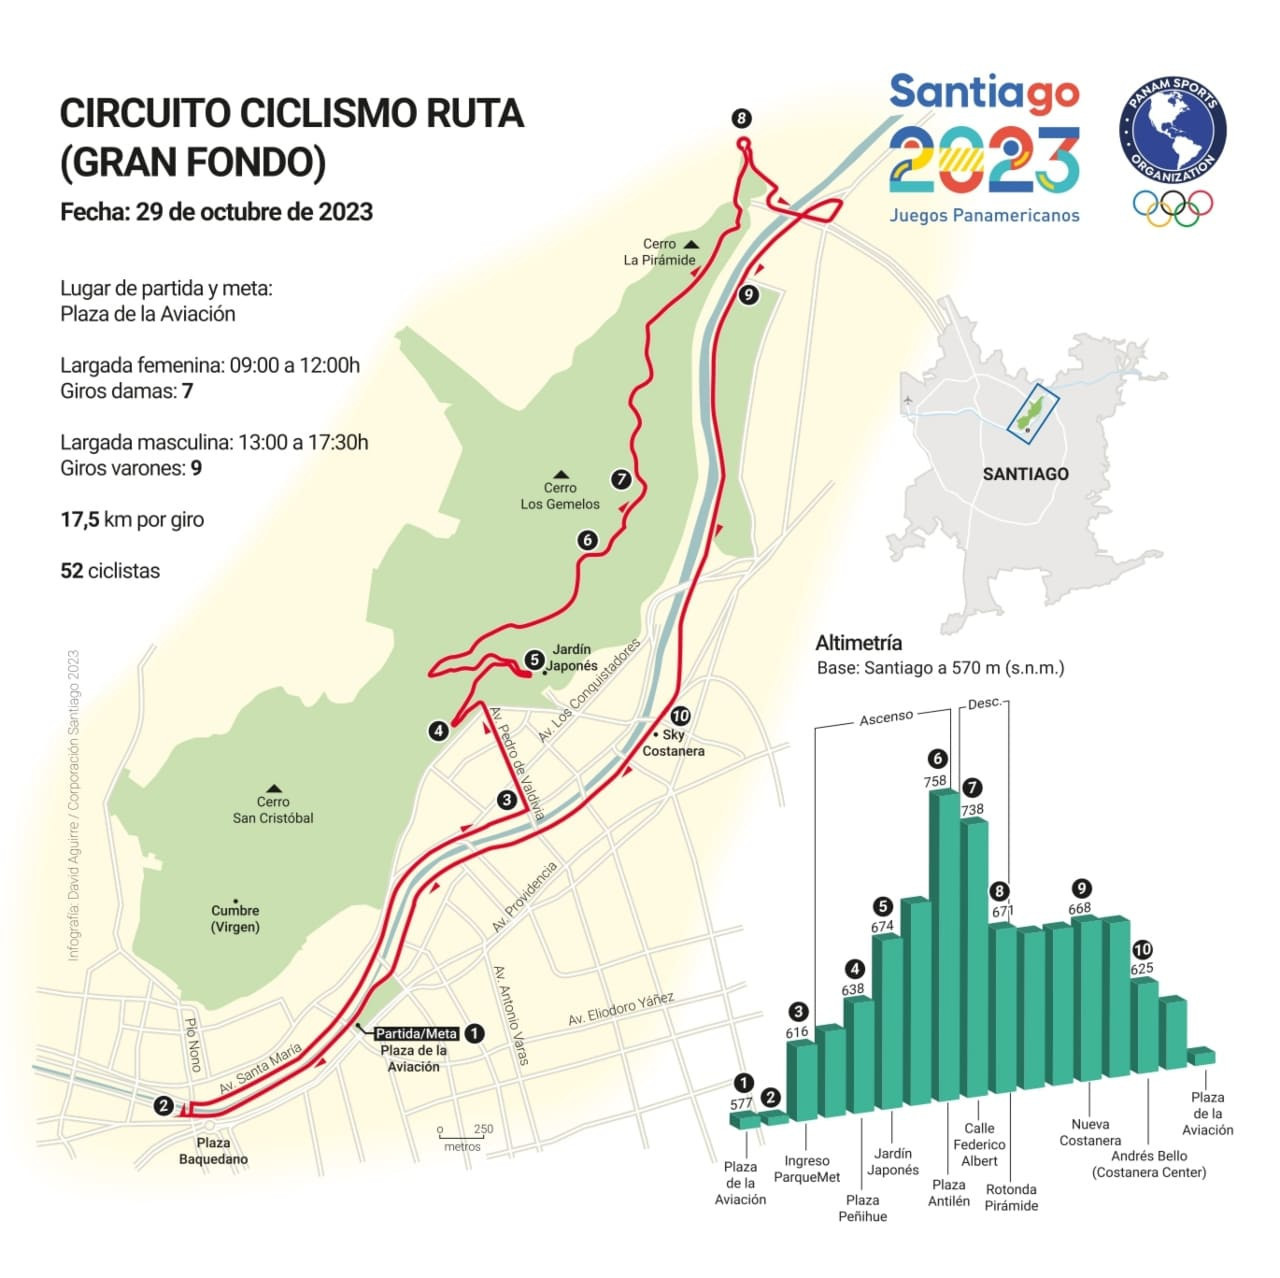 The route for the road cycling at the Santiago 2023 Pan American Games ©Santiago 2023 